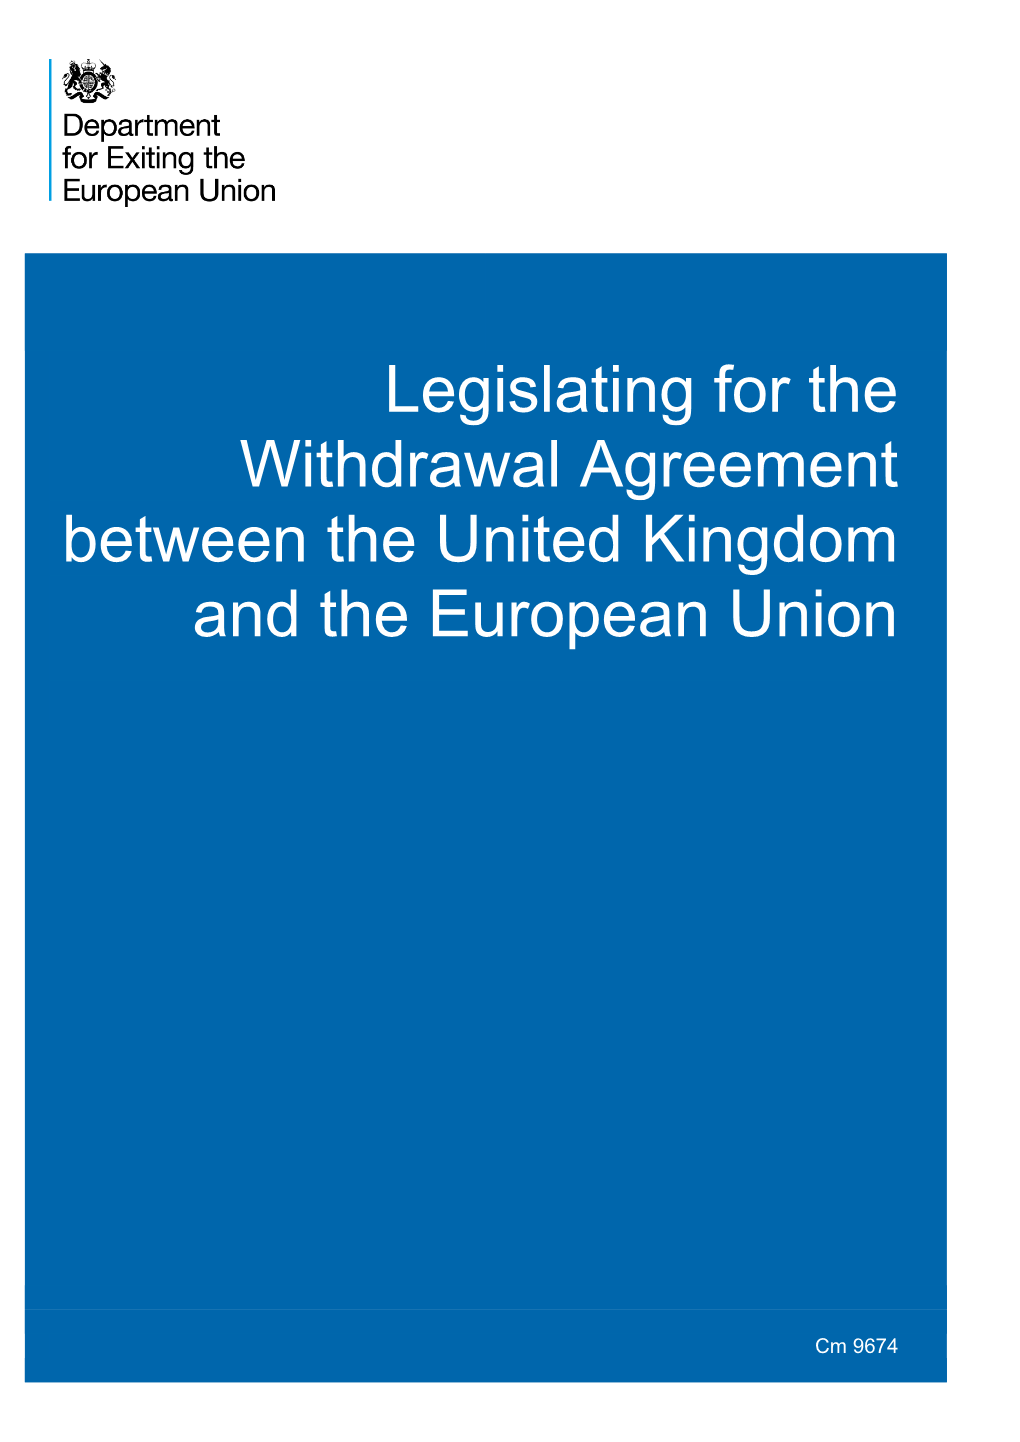 Legislating for the Withdrawal Agreement Between the United Kingdom and the European Union